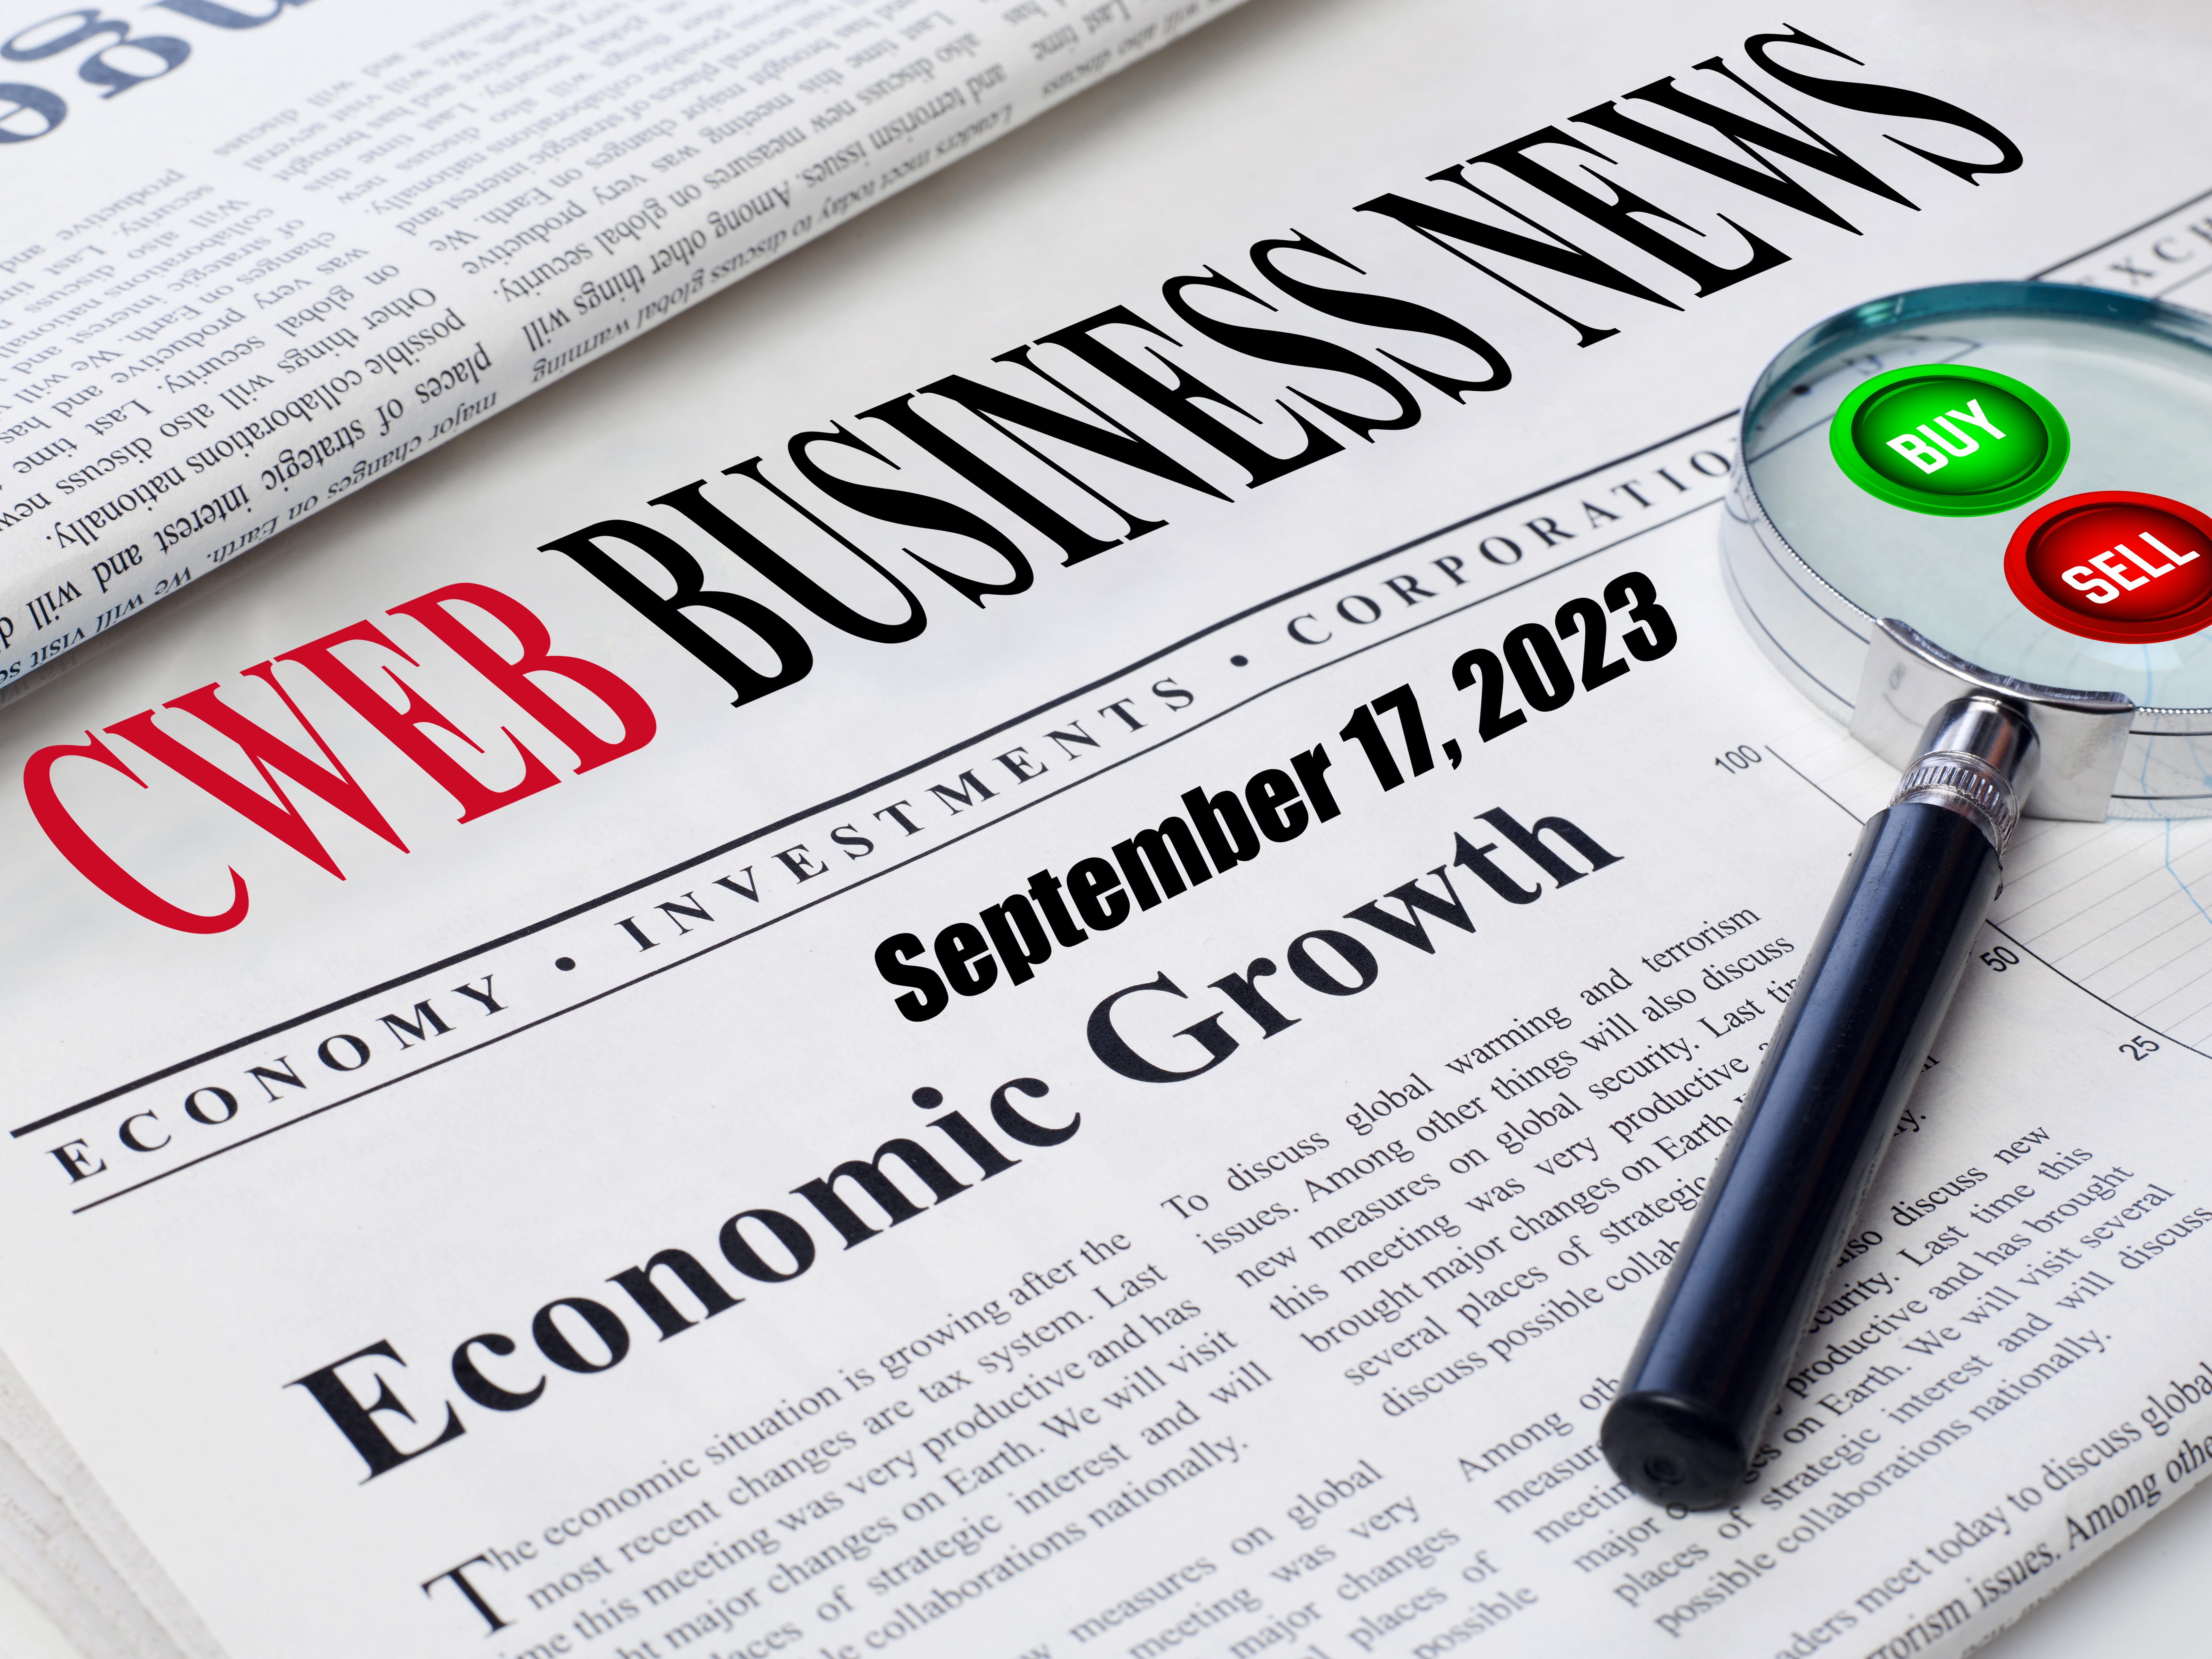 CWEB Publishes Roundup of Business and Trending News Highlights that Matter the Most - October 19, 2023